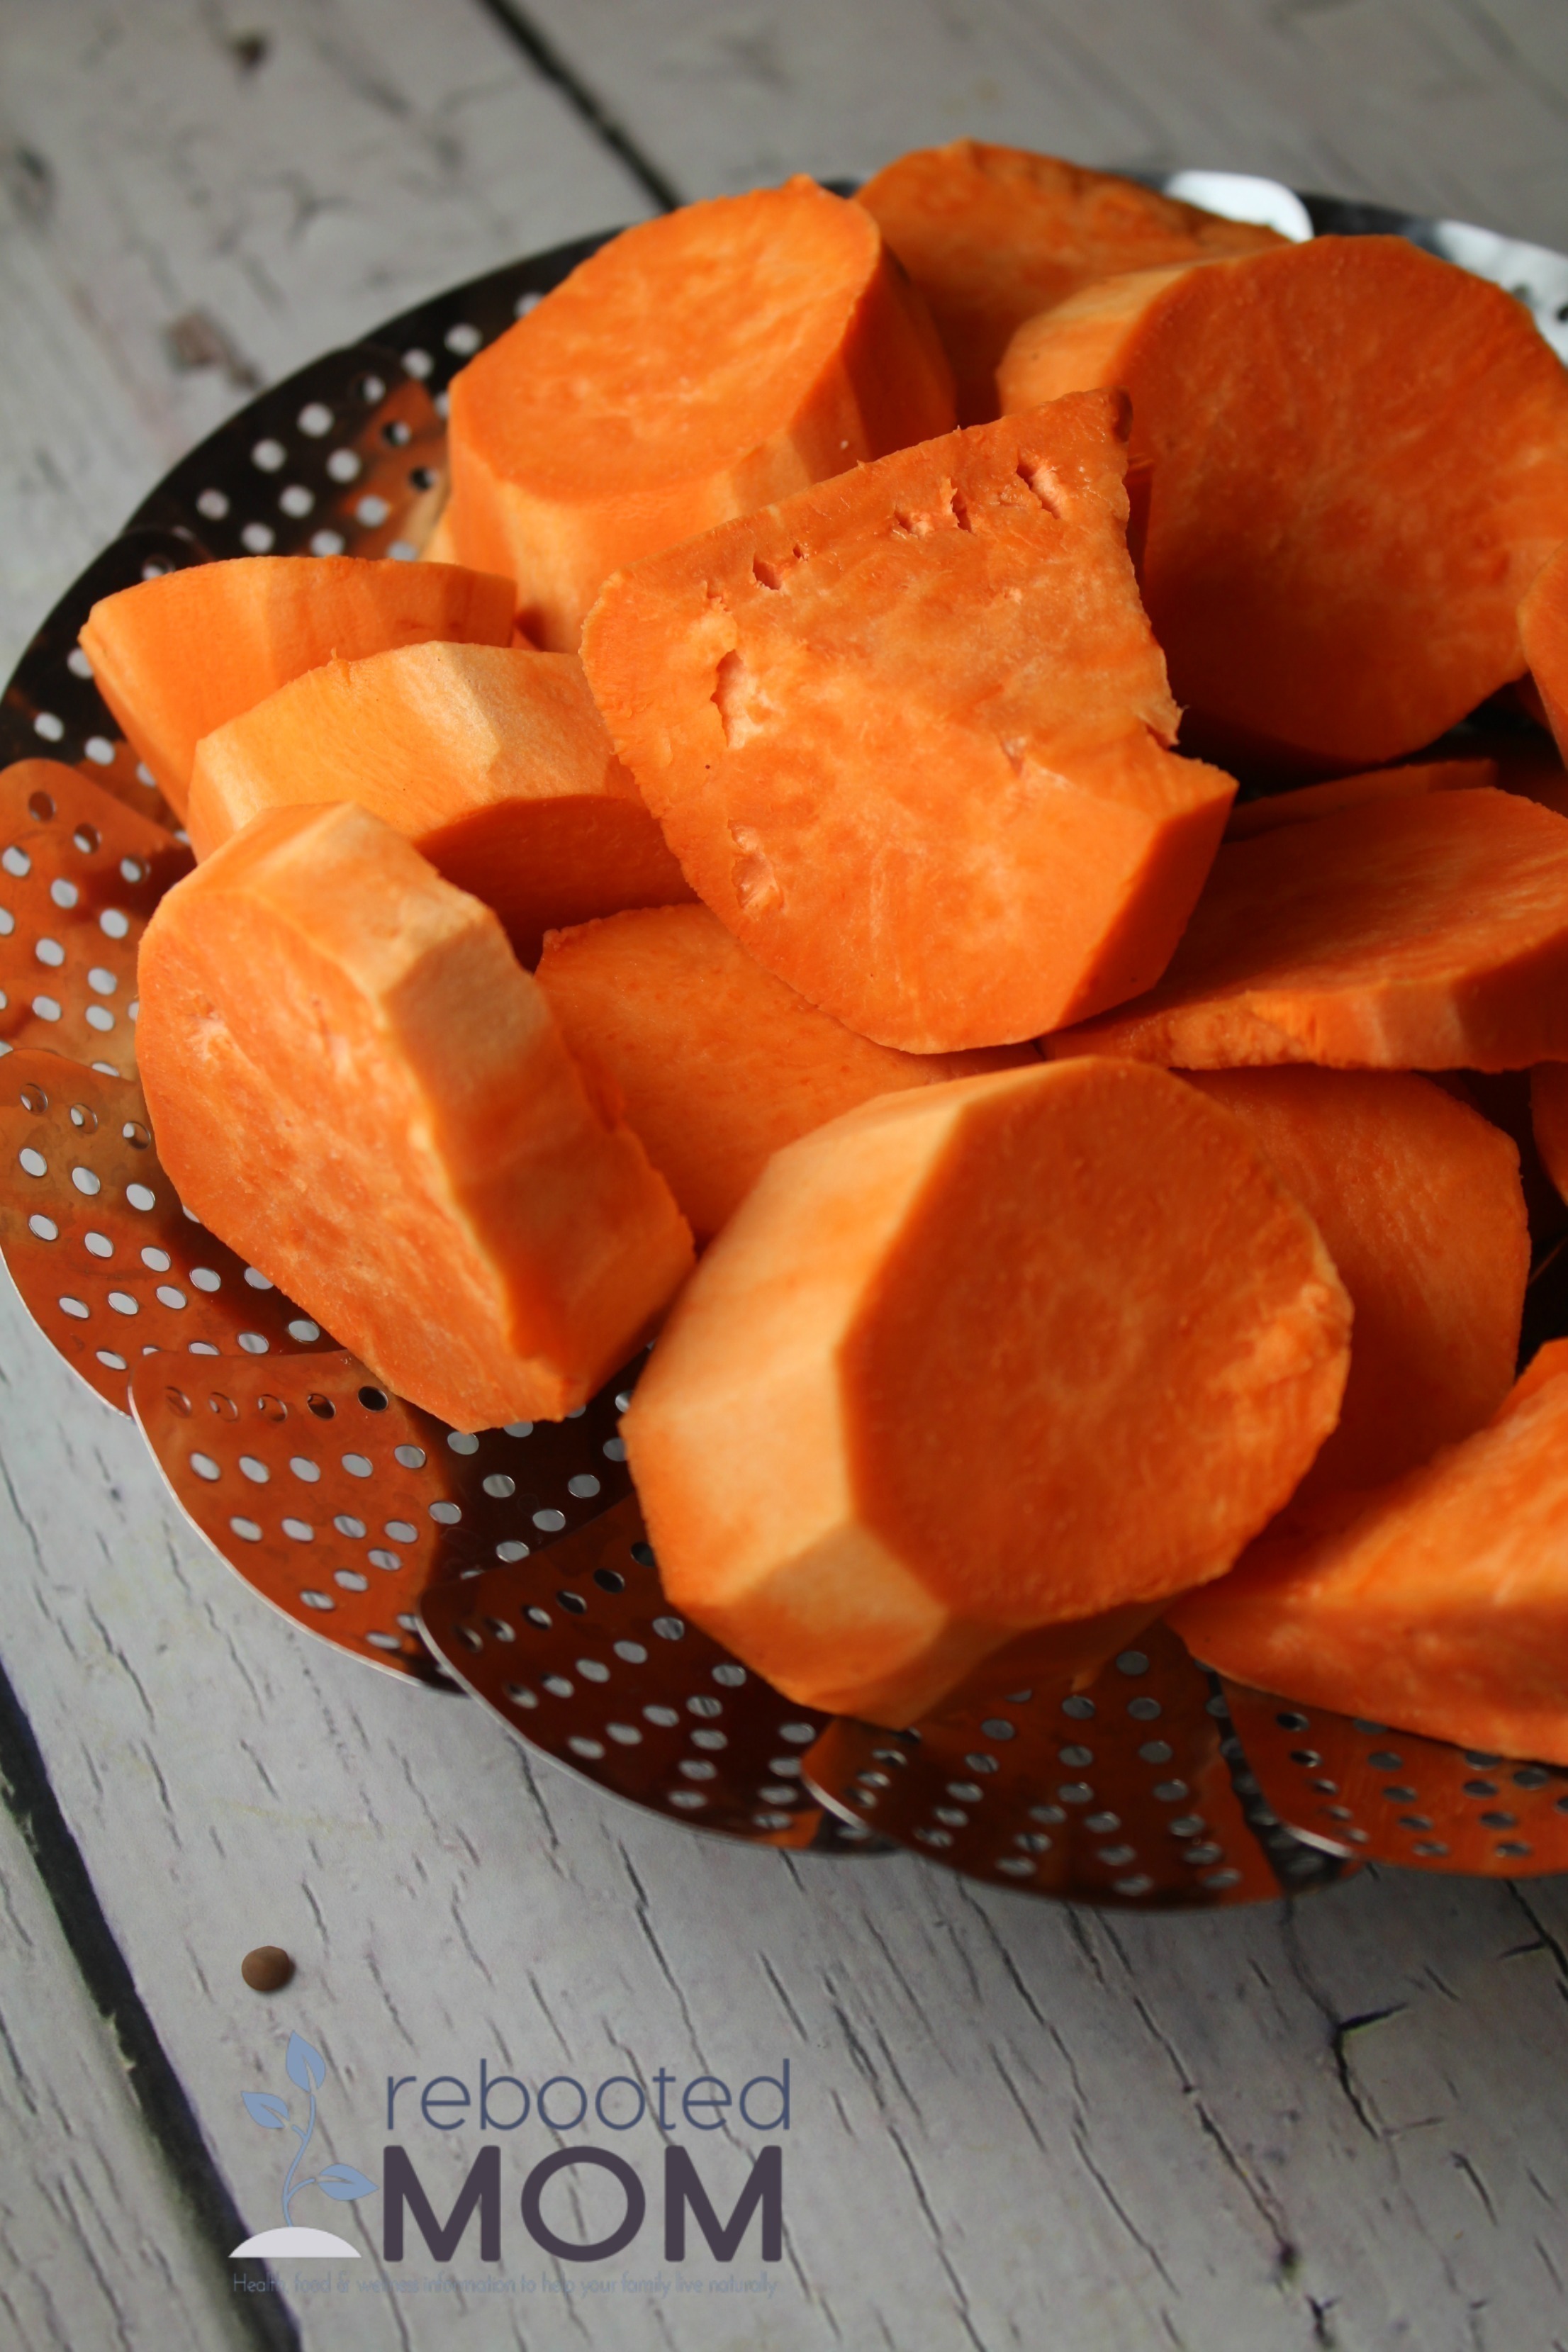 Sweet Potatoes in the Instant Pot